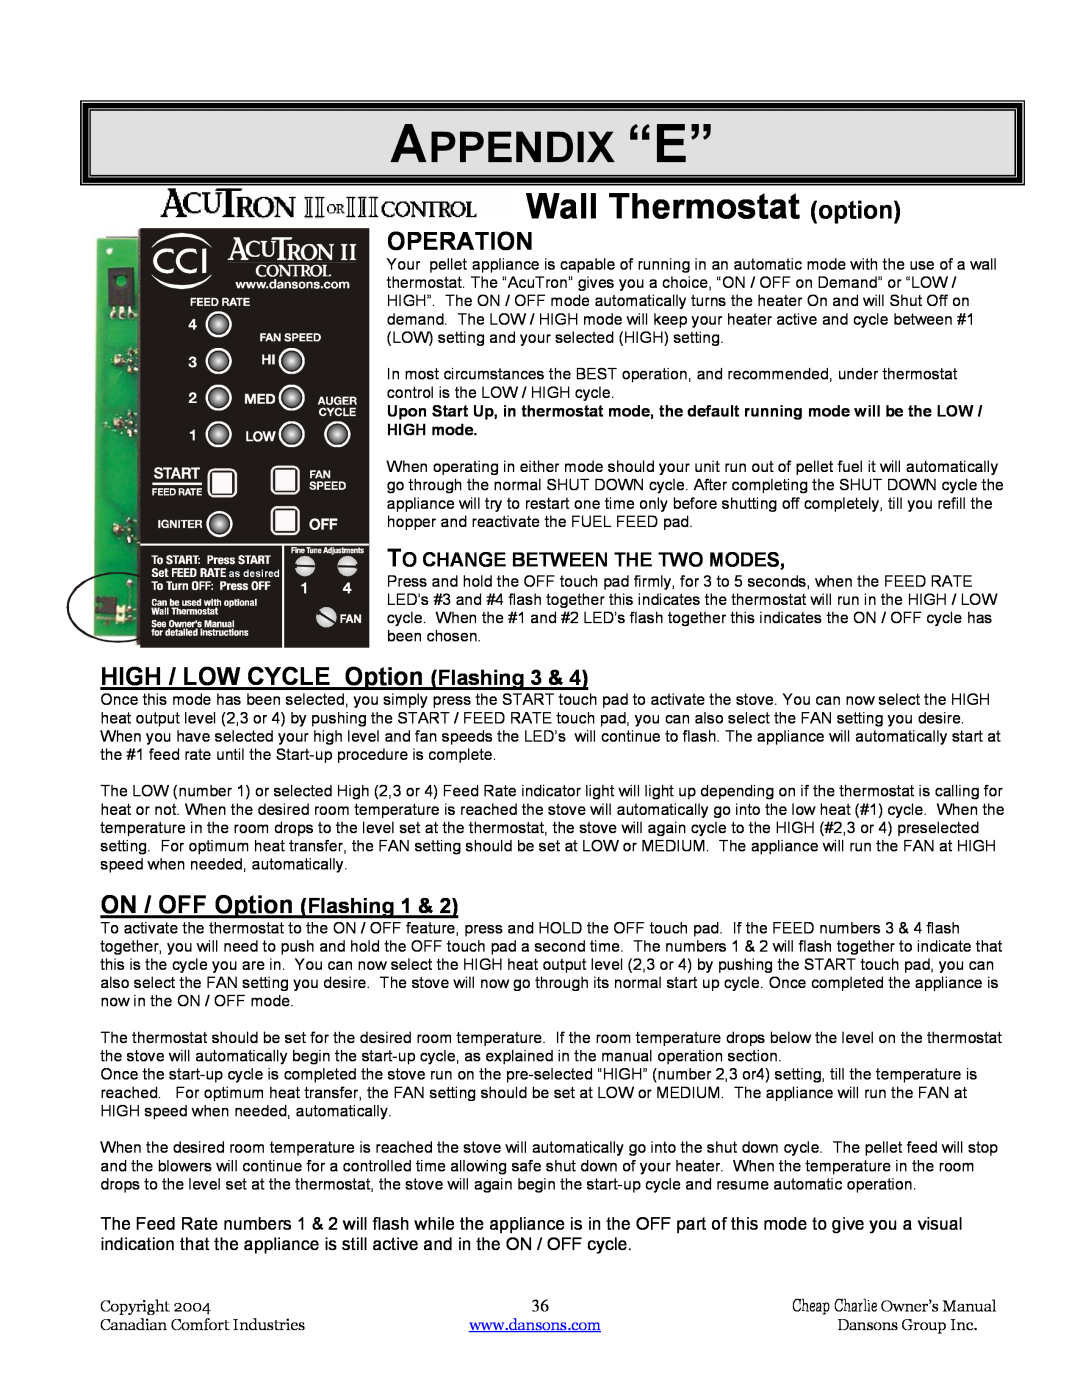 Dansons Group HCF120, HCS, HCF300, HCJ Appendix “E”, Wall Thermostat option, Operation, HIGH / LOW CYCLE Option Flashing 